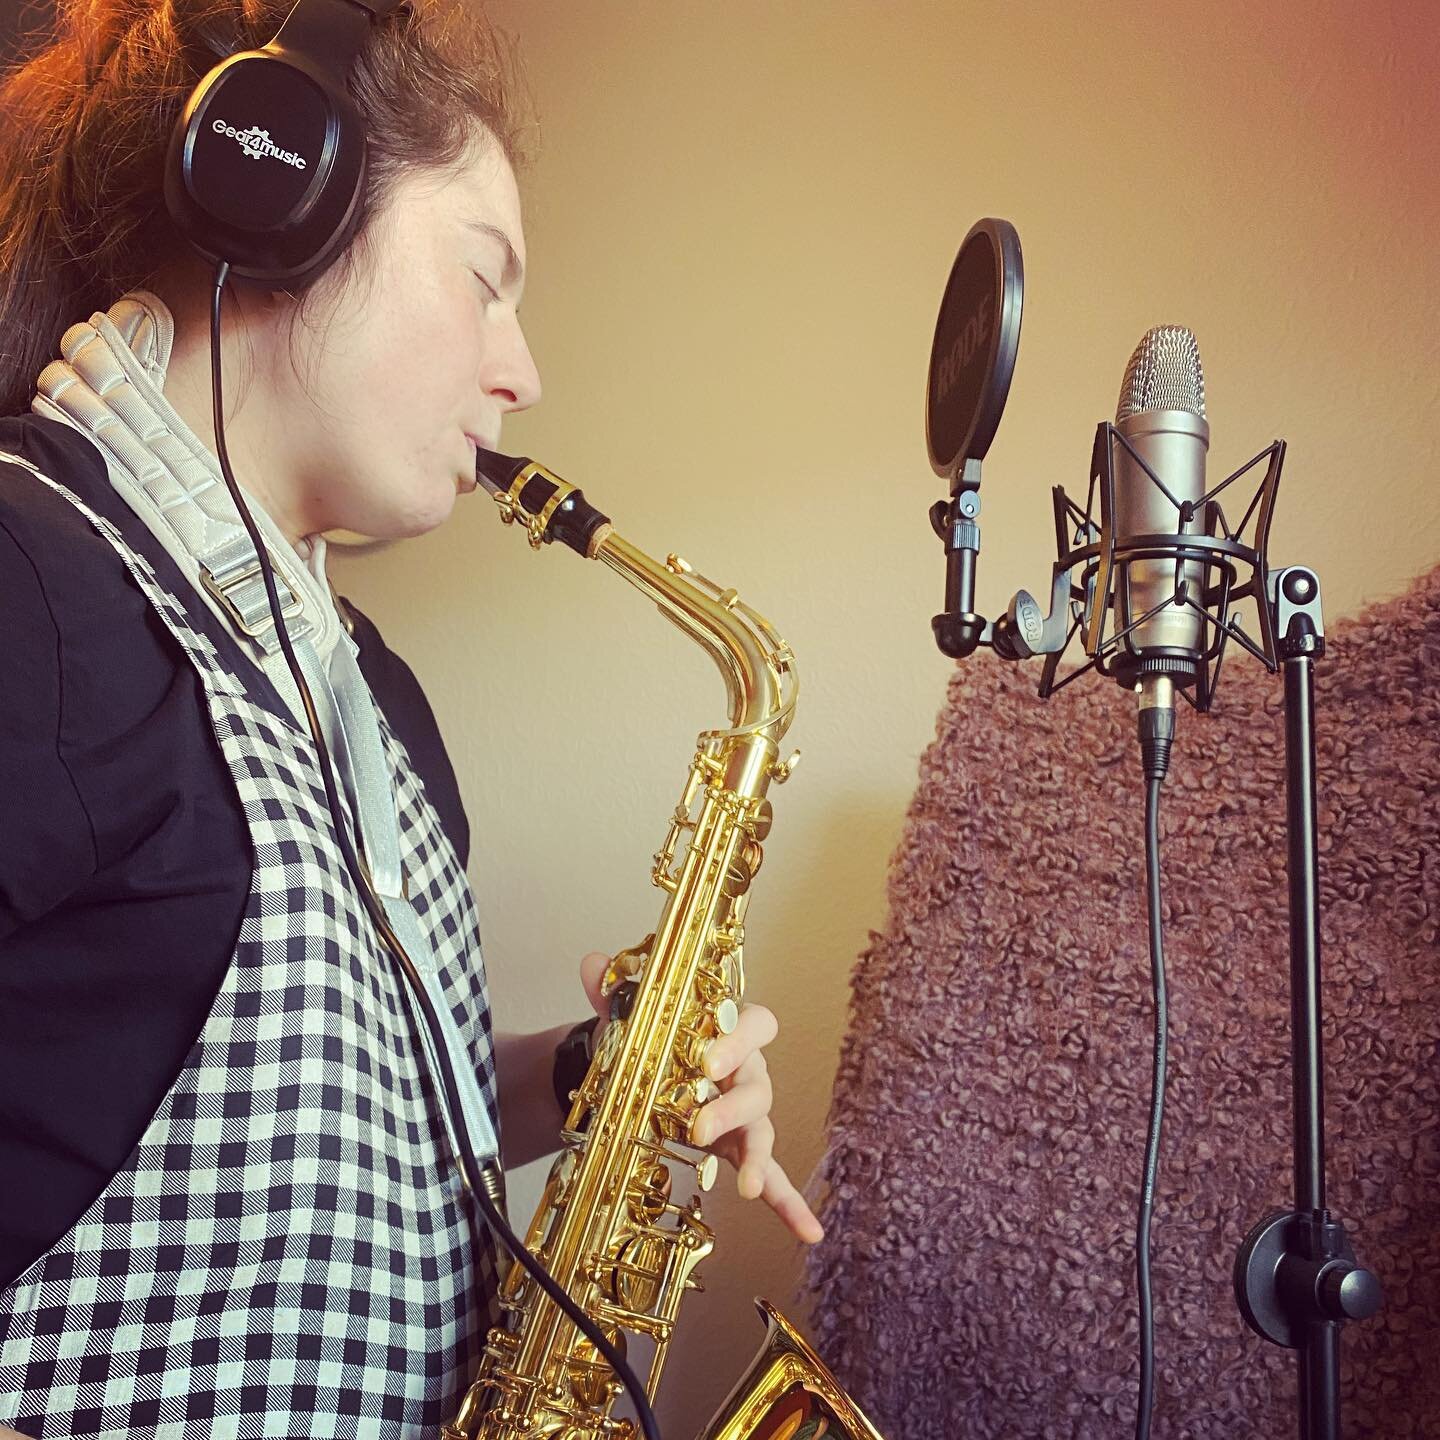 There&rsquo;s been more recording happening today!

Today we had the insanely talented Sophie Coward come and not only sing, but also record sax, bass AND flute on top 🎷🎸🎶

#JULIETheMusical #Recording #JulieDaubigny #Musical #NewMusic